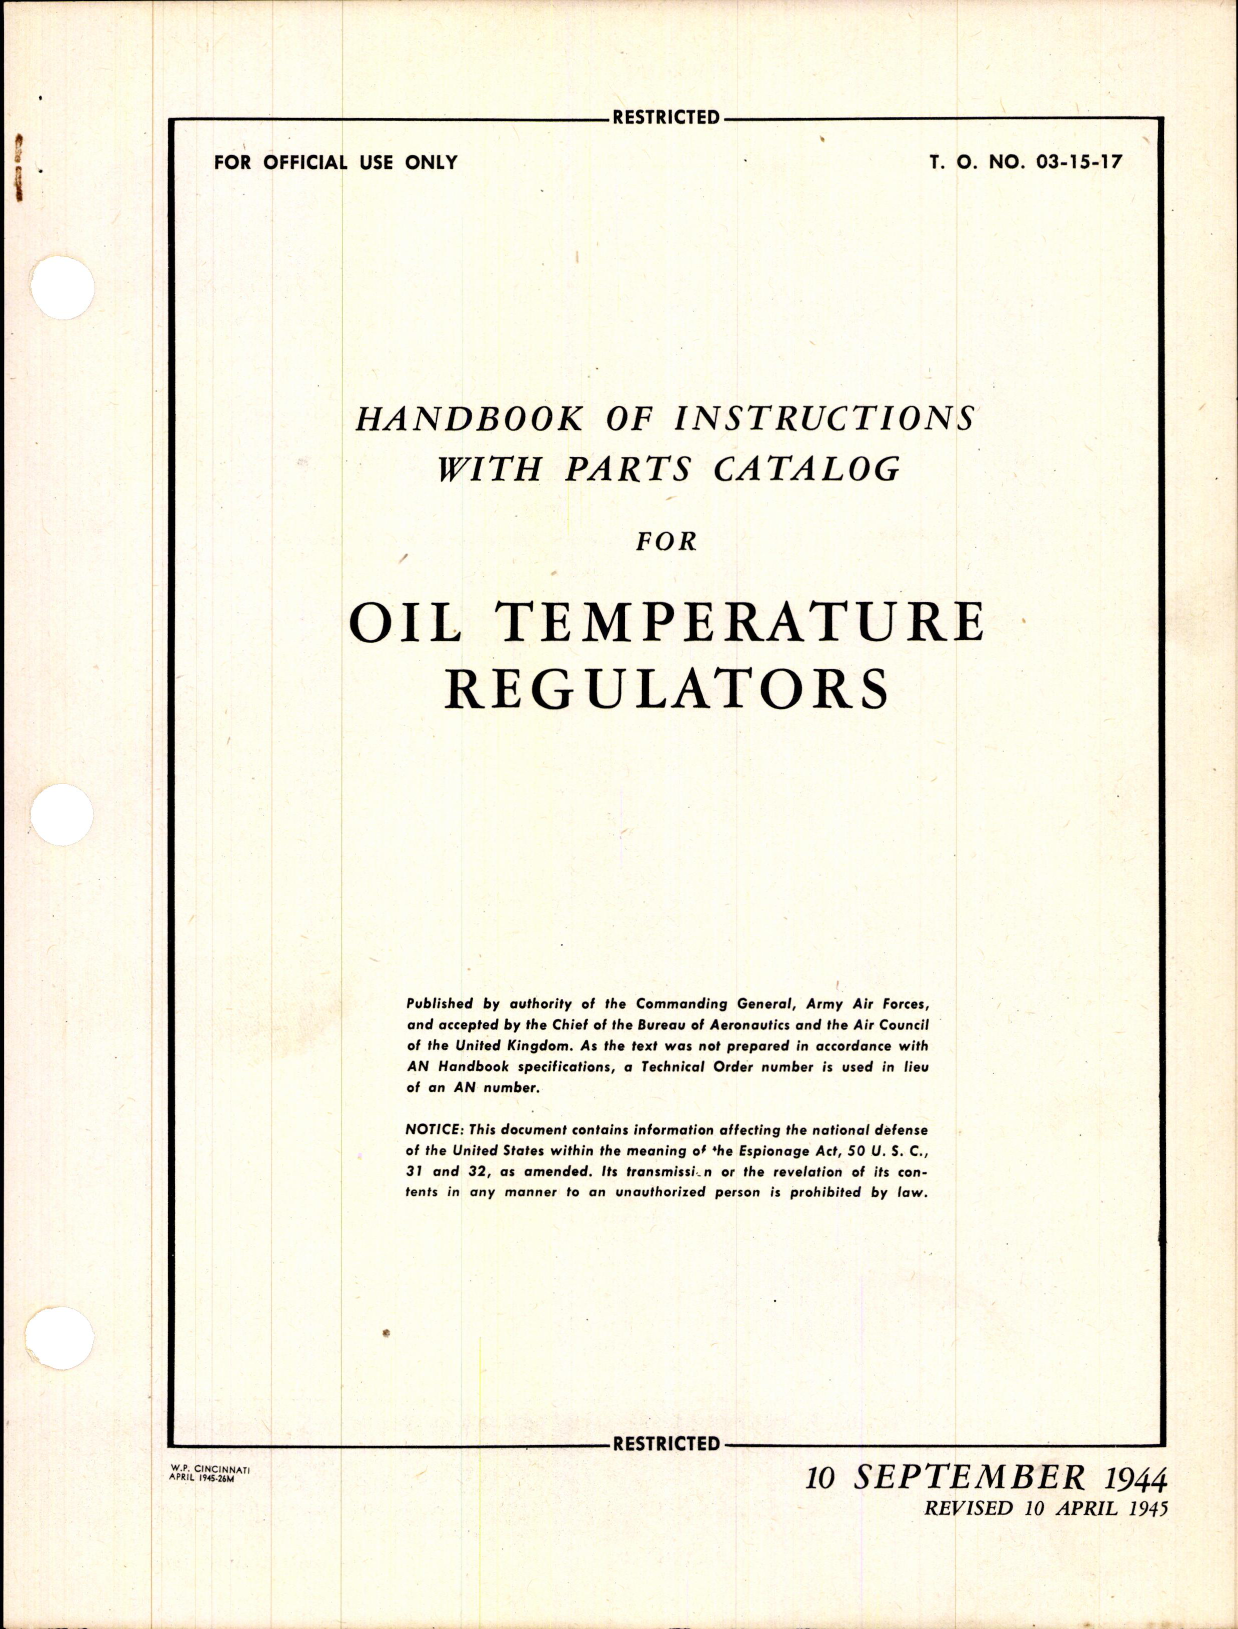 Sample page 1 from AirCorps Library document: Instructions with Parts Catalog for Airesearch Oil Temperature Regulators